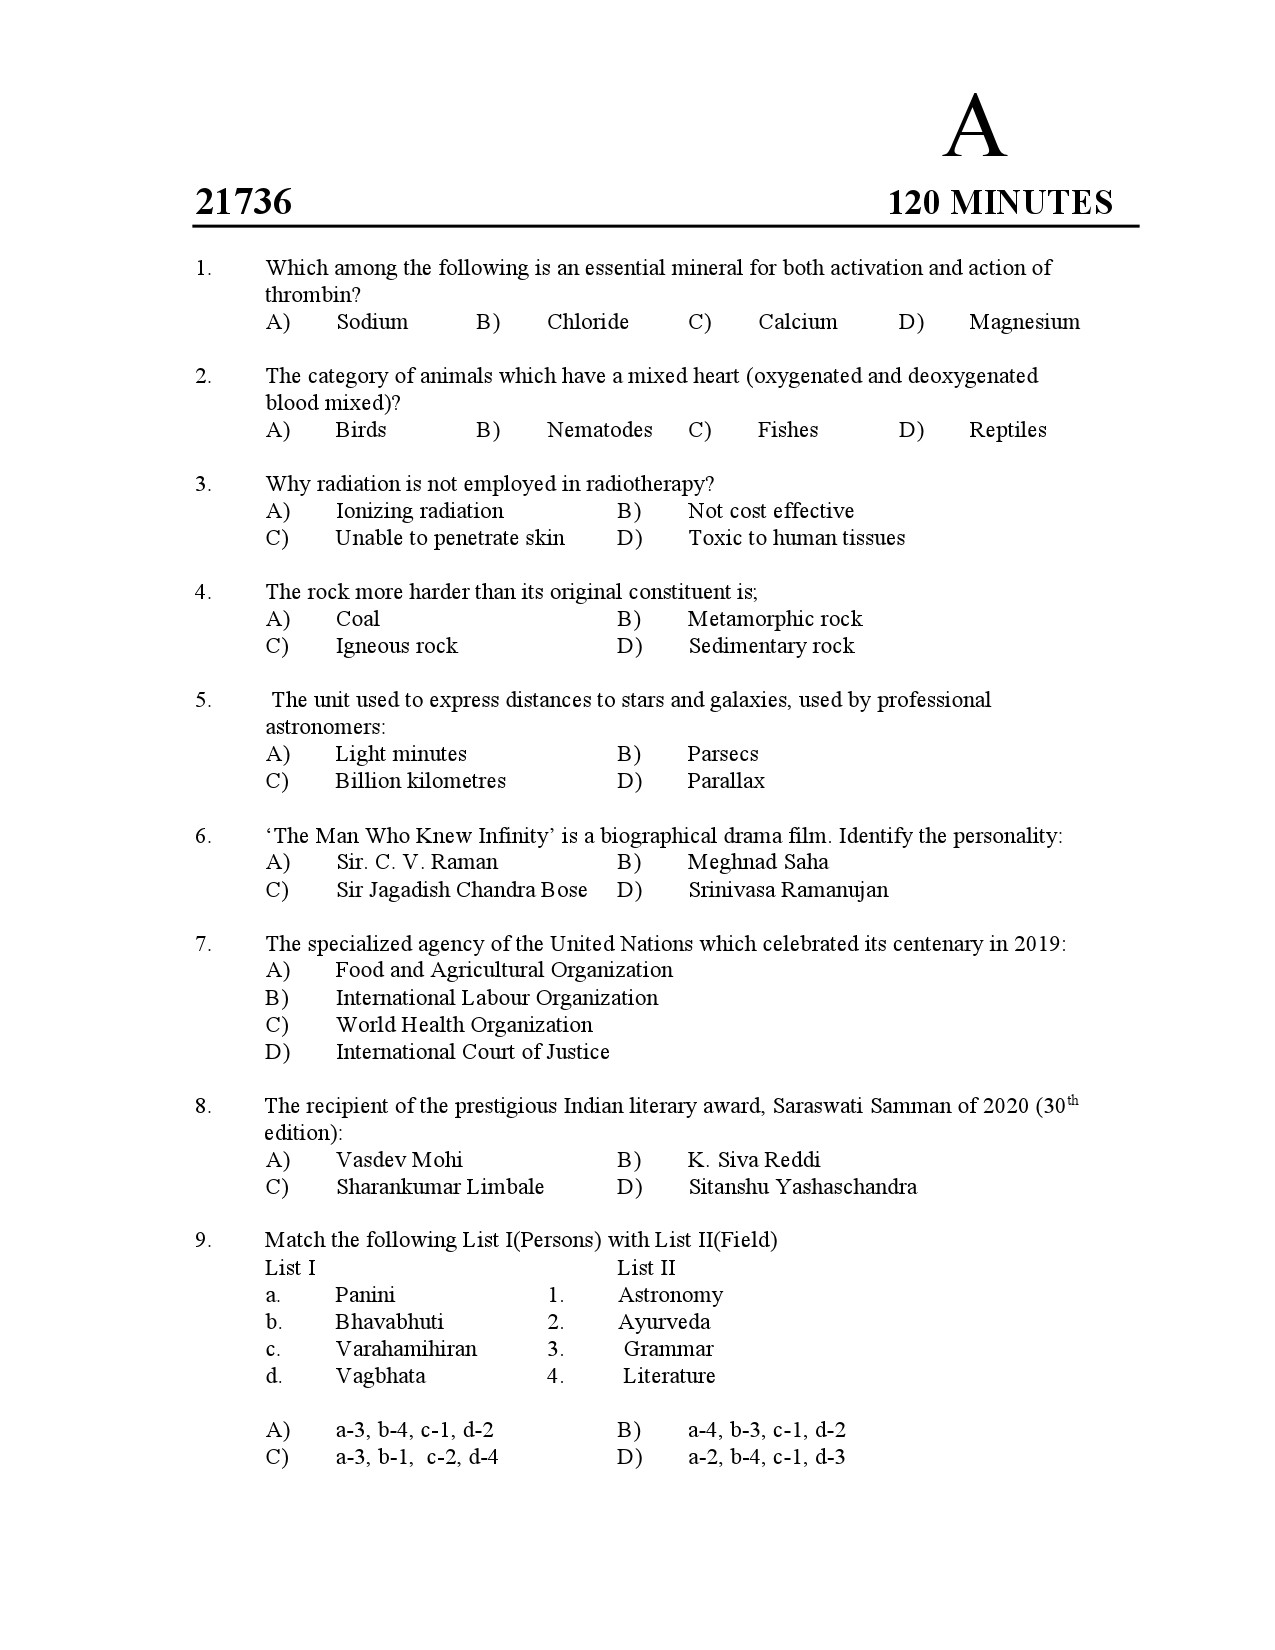 Kerala SET General Knowledge Exam Question Paper July 2021 1